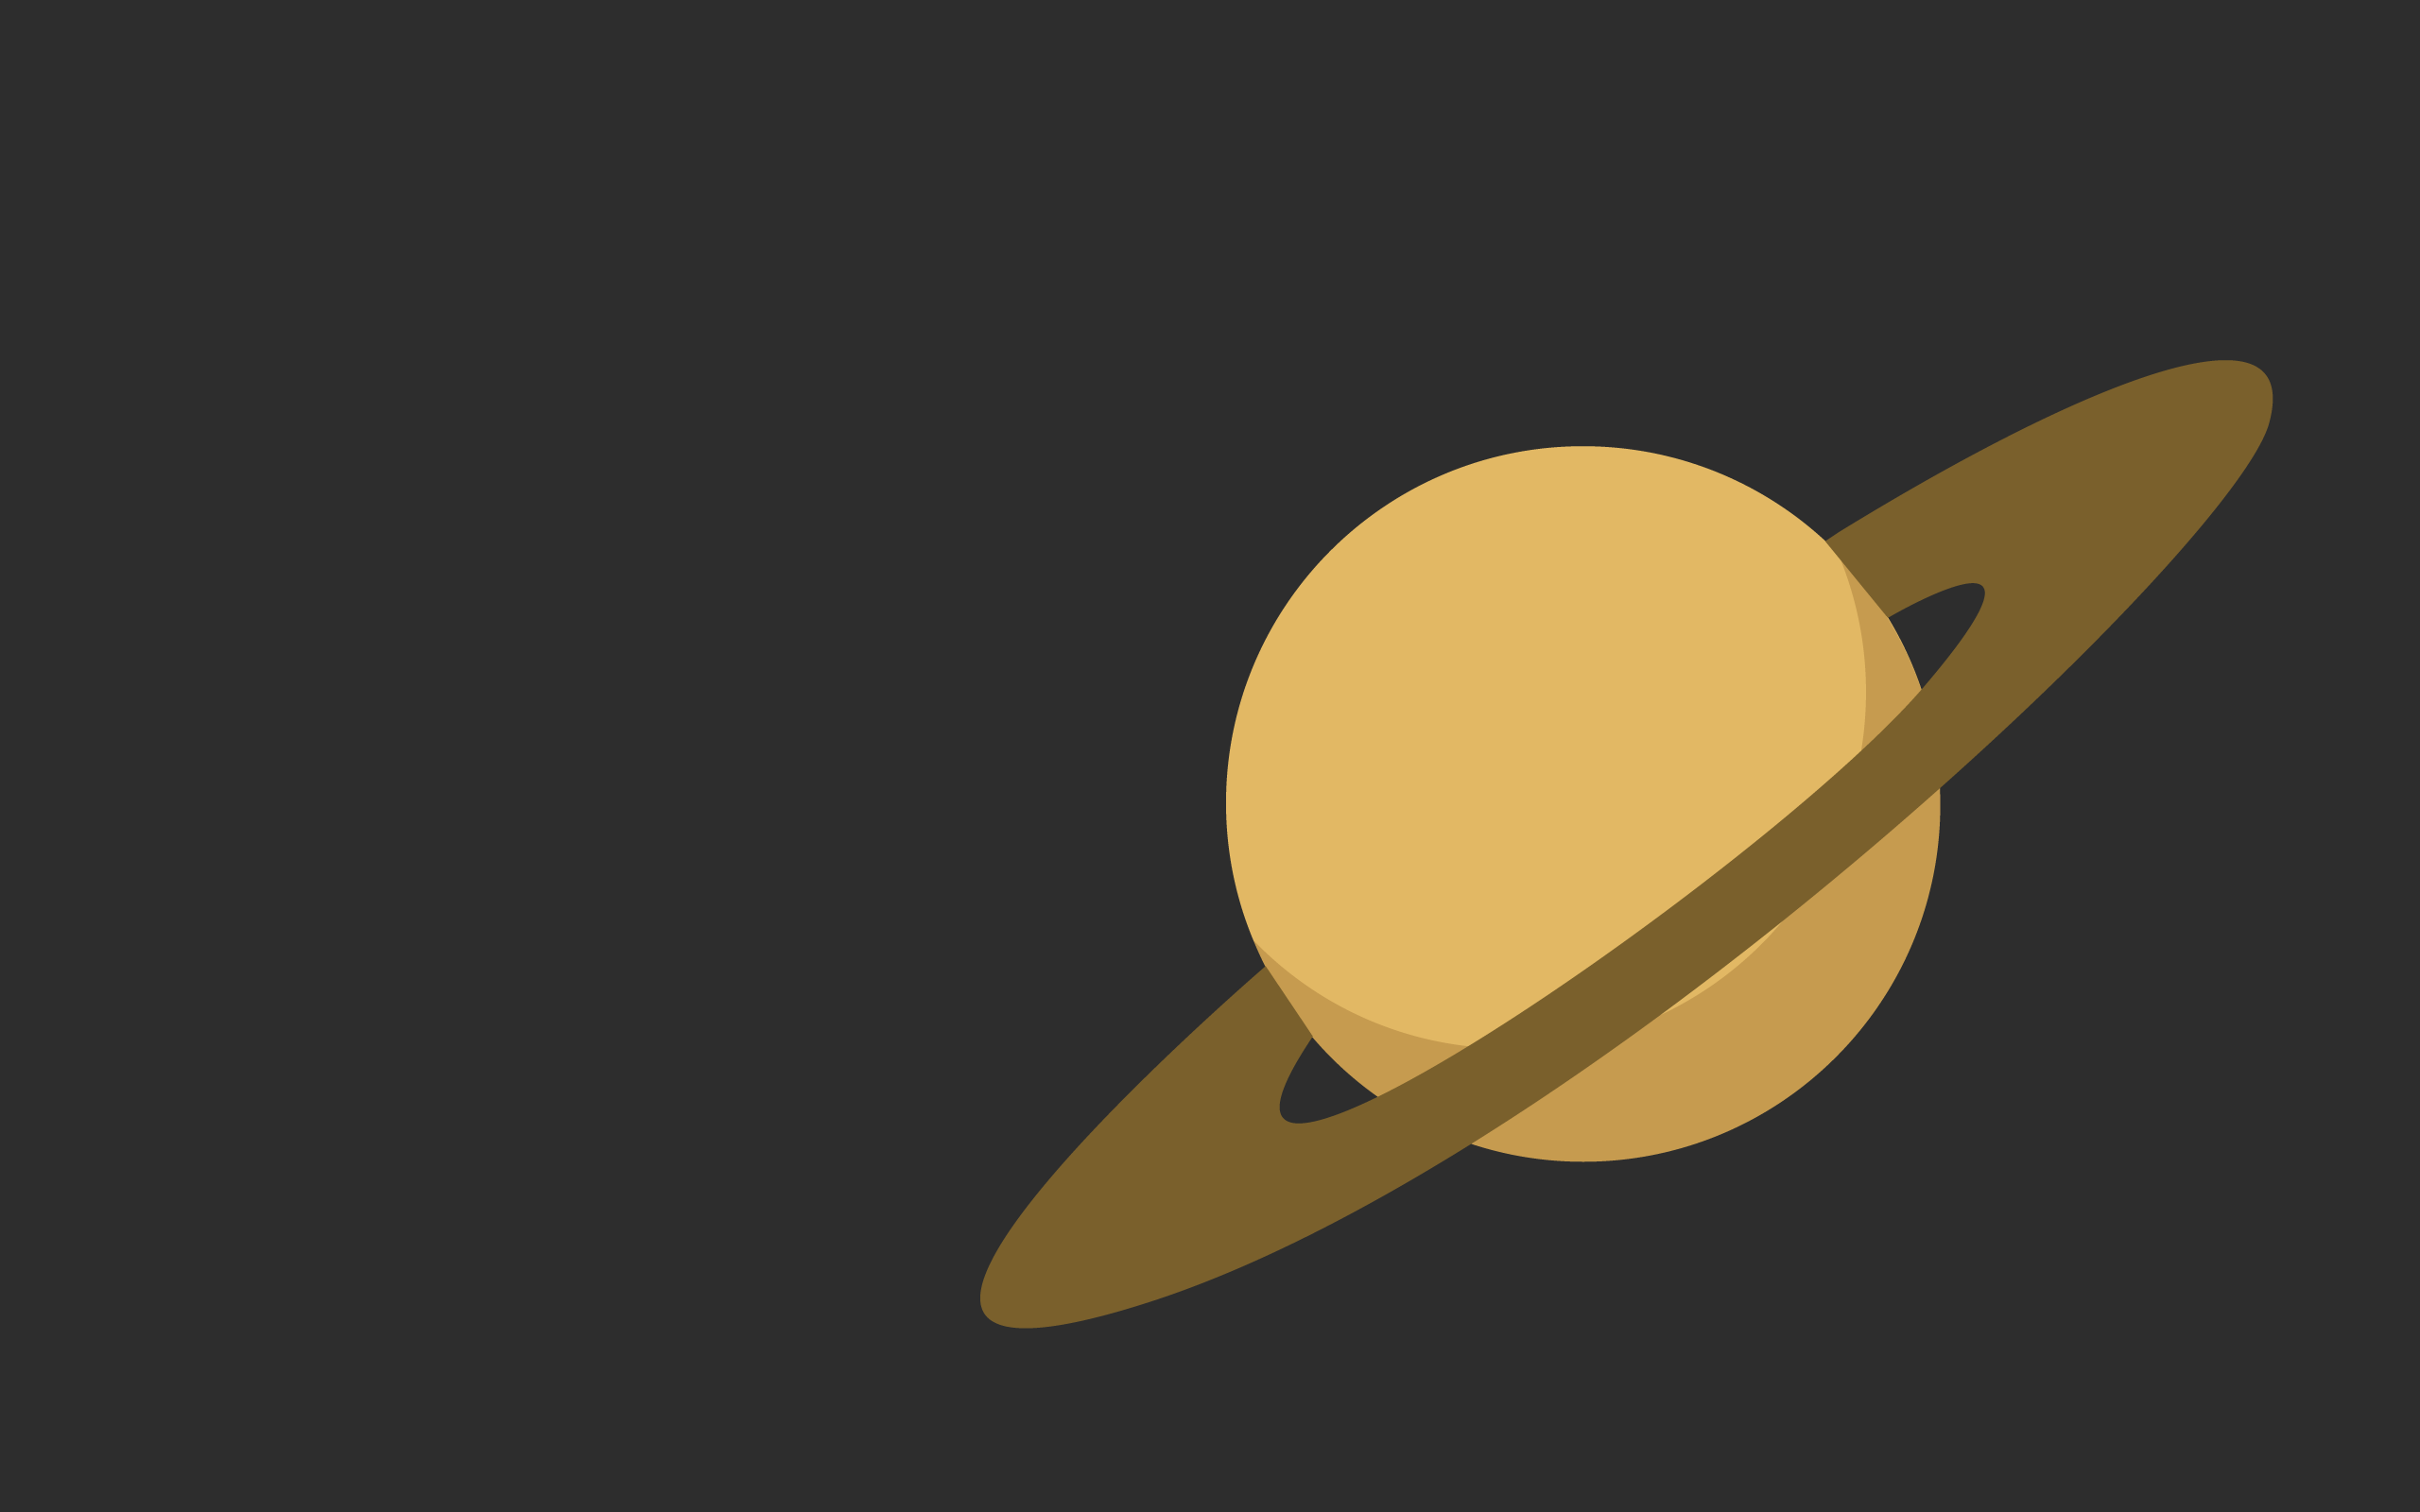 General 2560x1600 minimalism Saturn vector planet space space art simple background